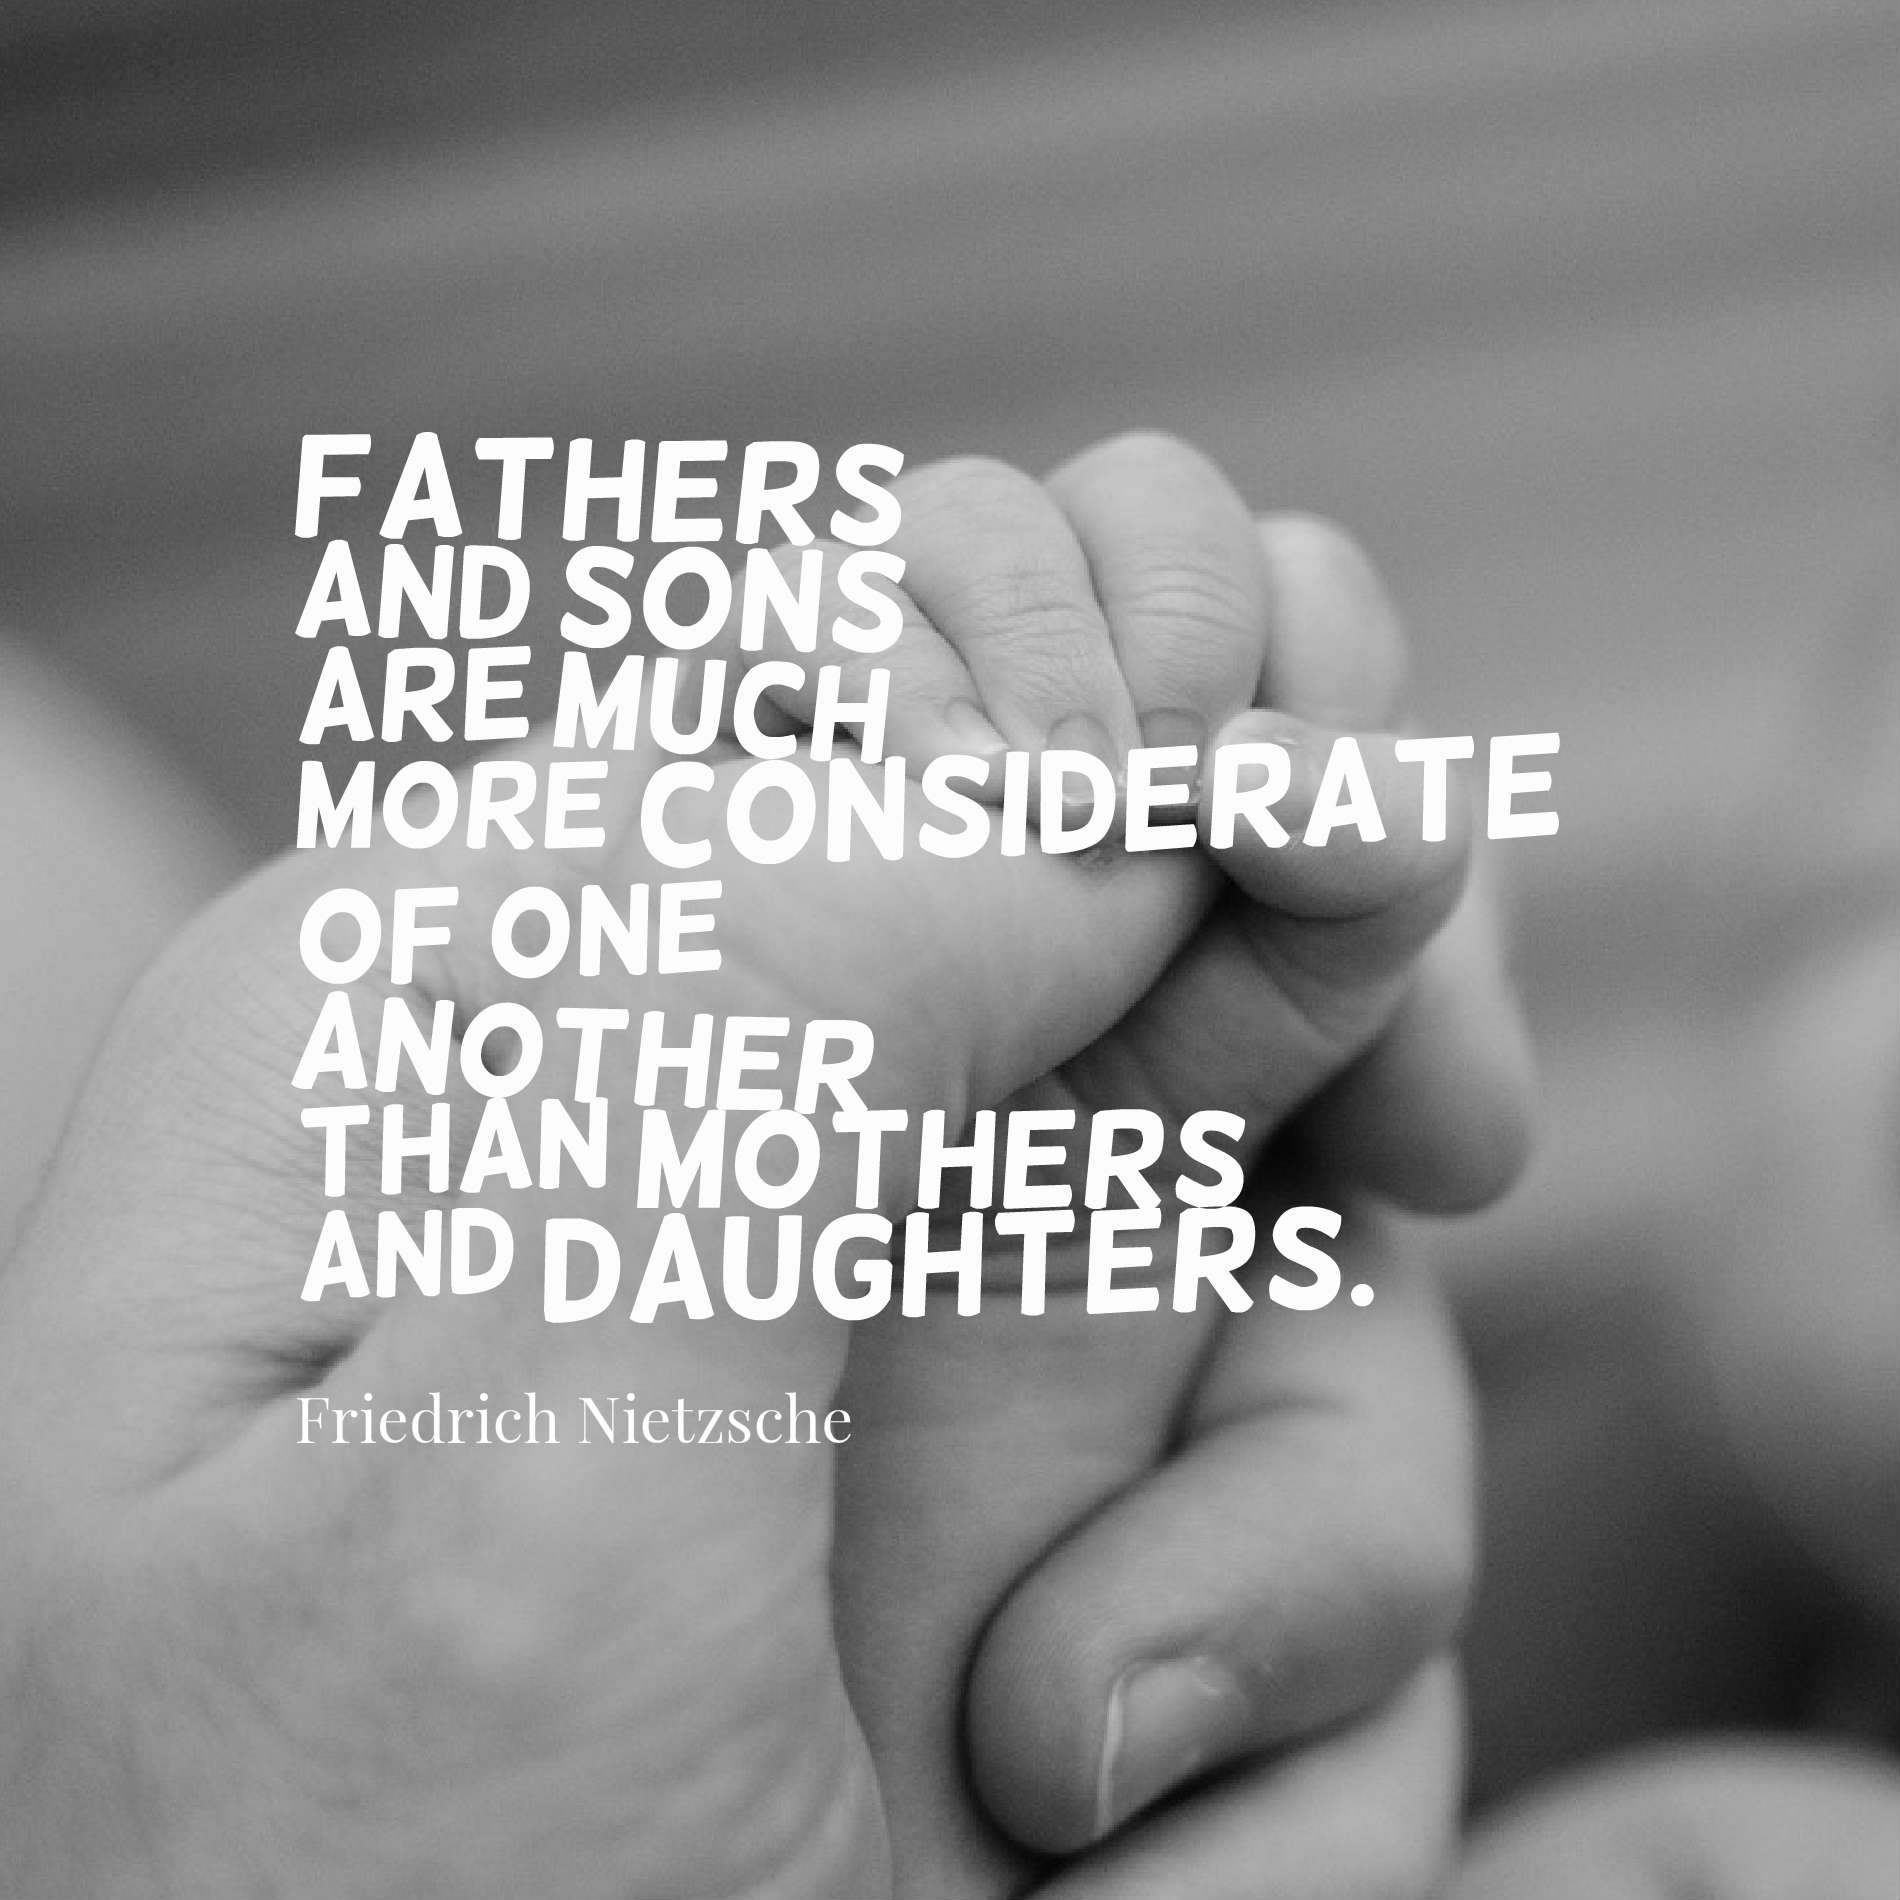 Fathers and sons are much more considerate of one another than mothers and daughters.